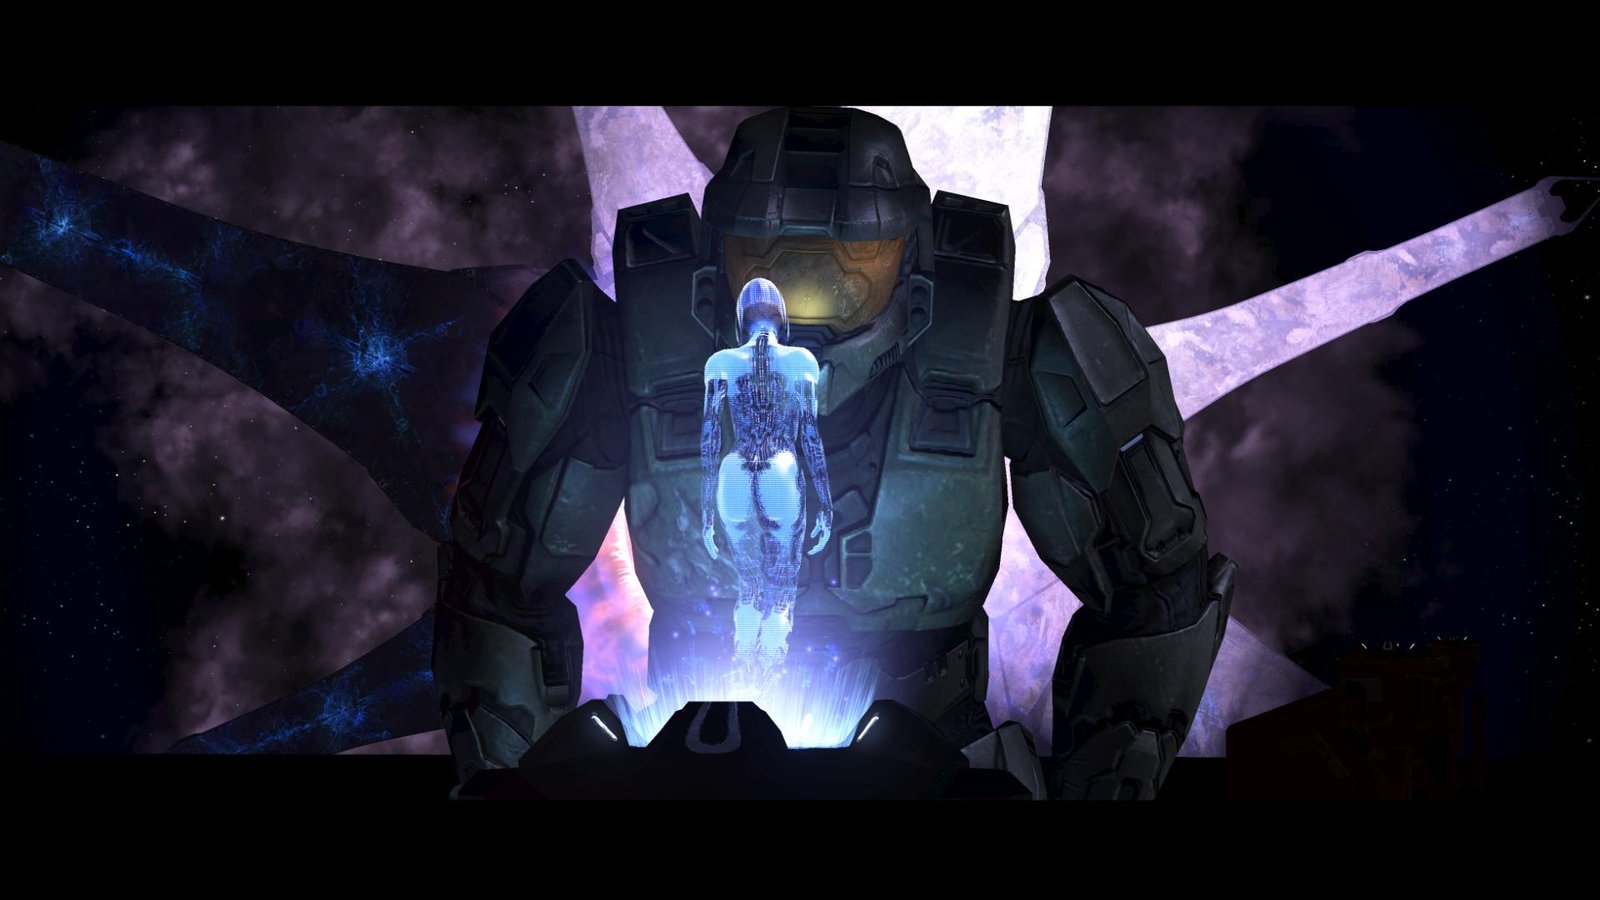 MASTER_CHIEF_AND_CORTANA_by_victortky.jpg